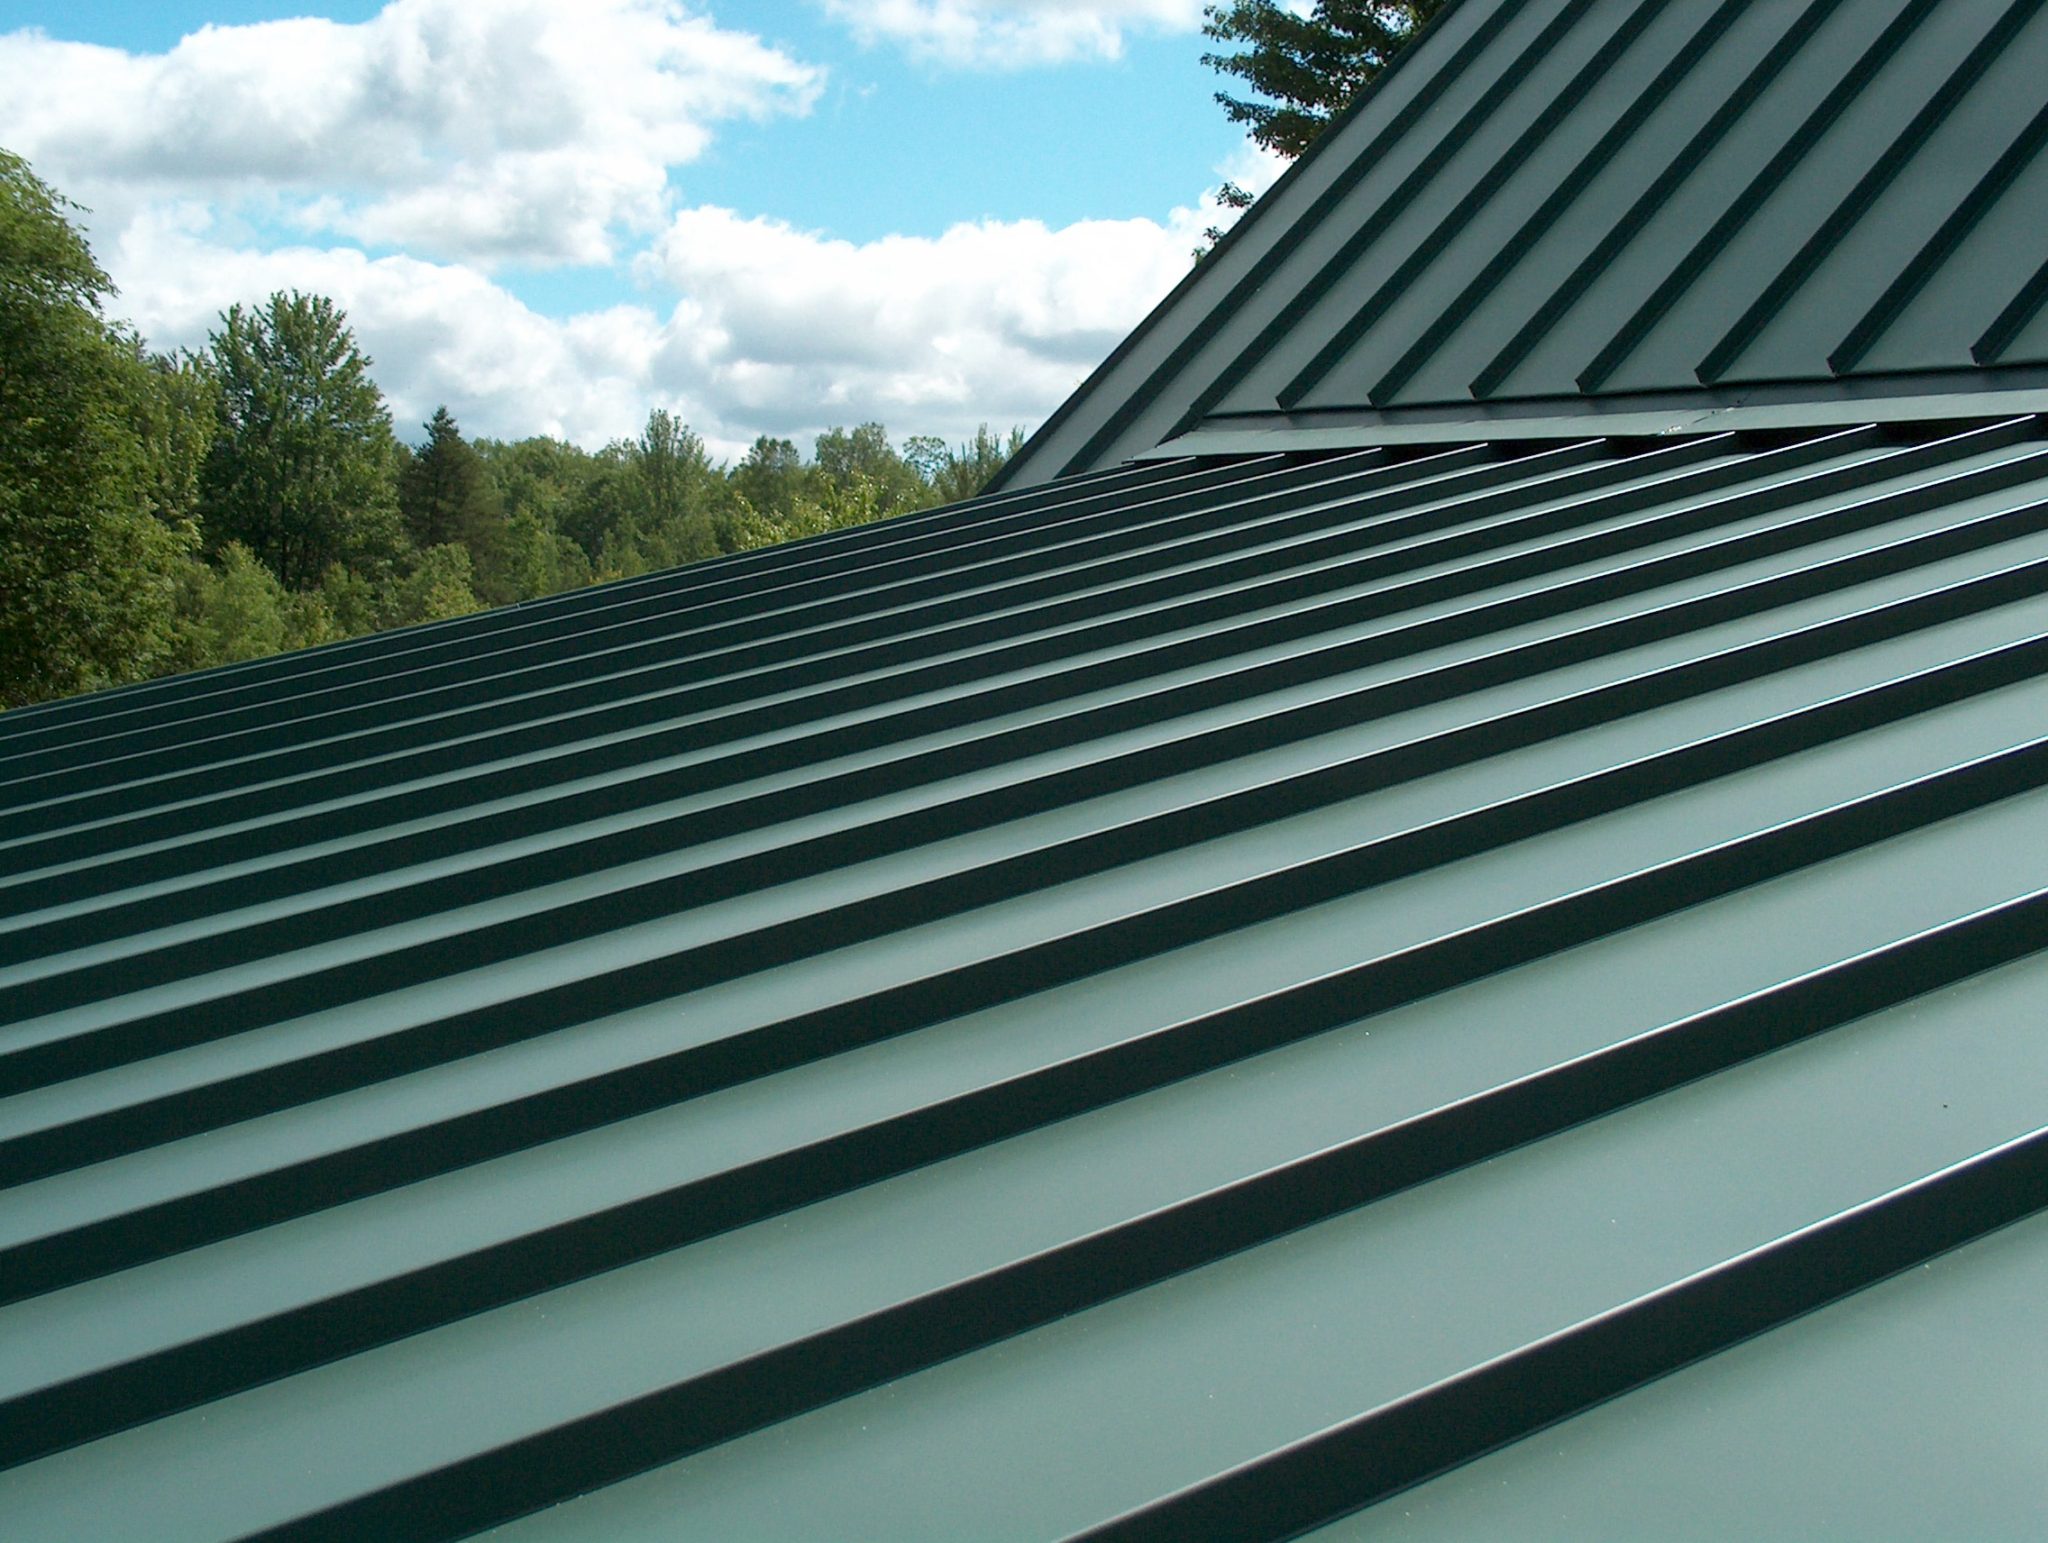 Standing Seam Metal Roofing: Concealed Fasteners and More